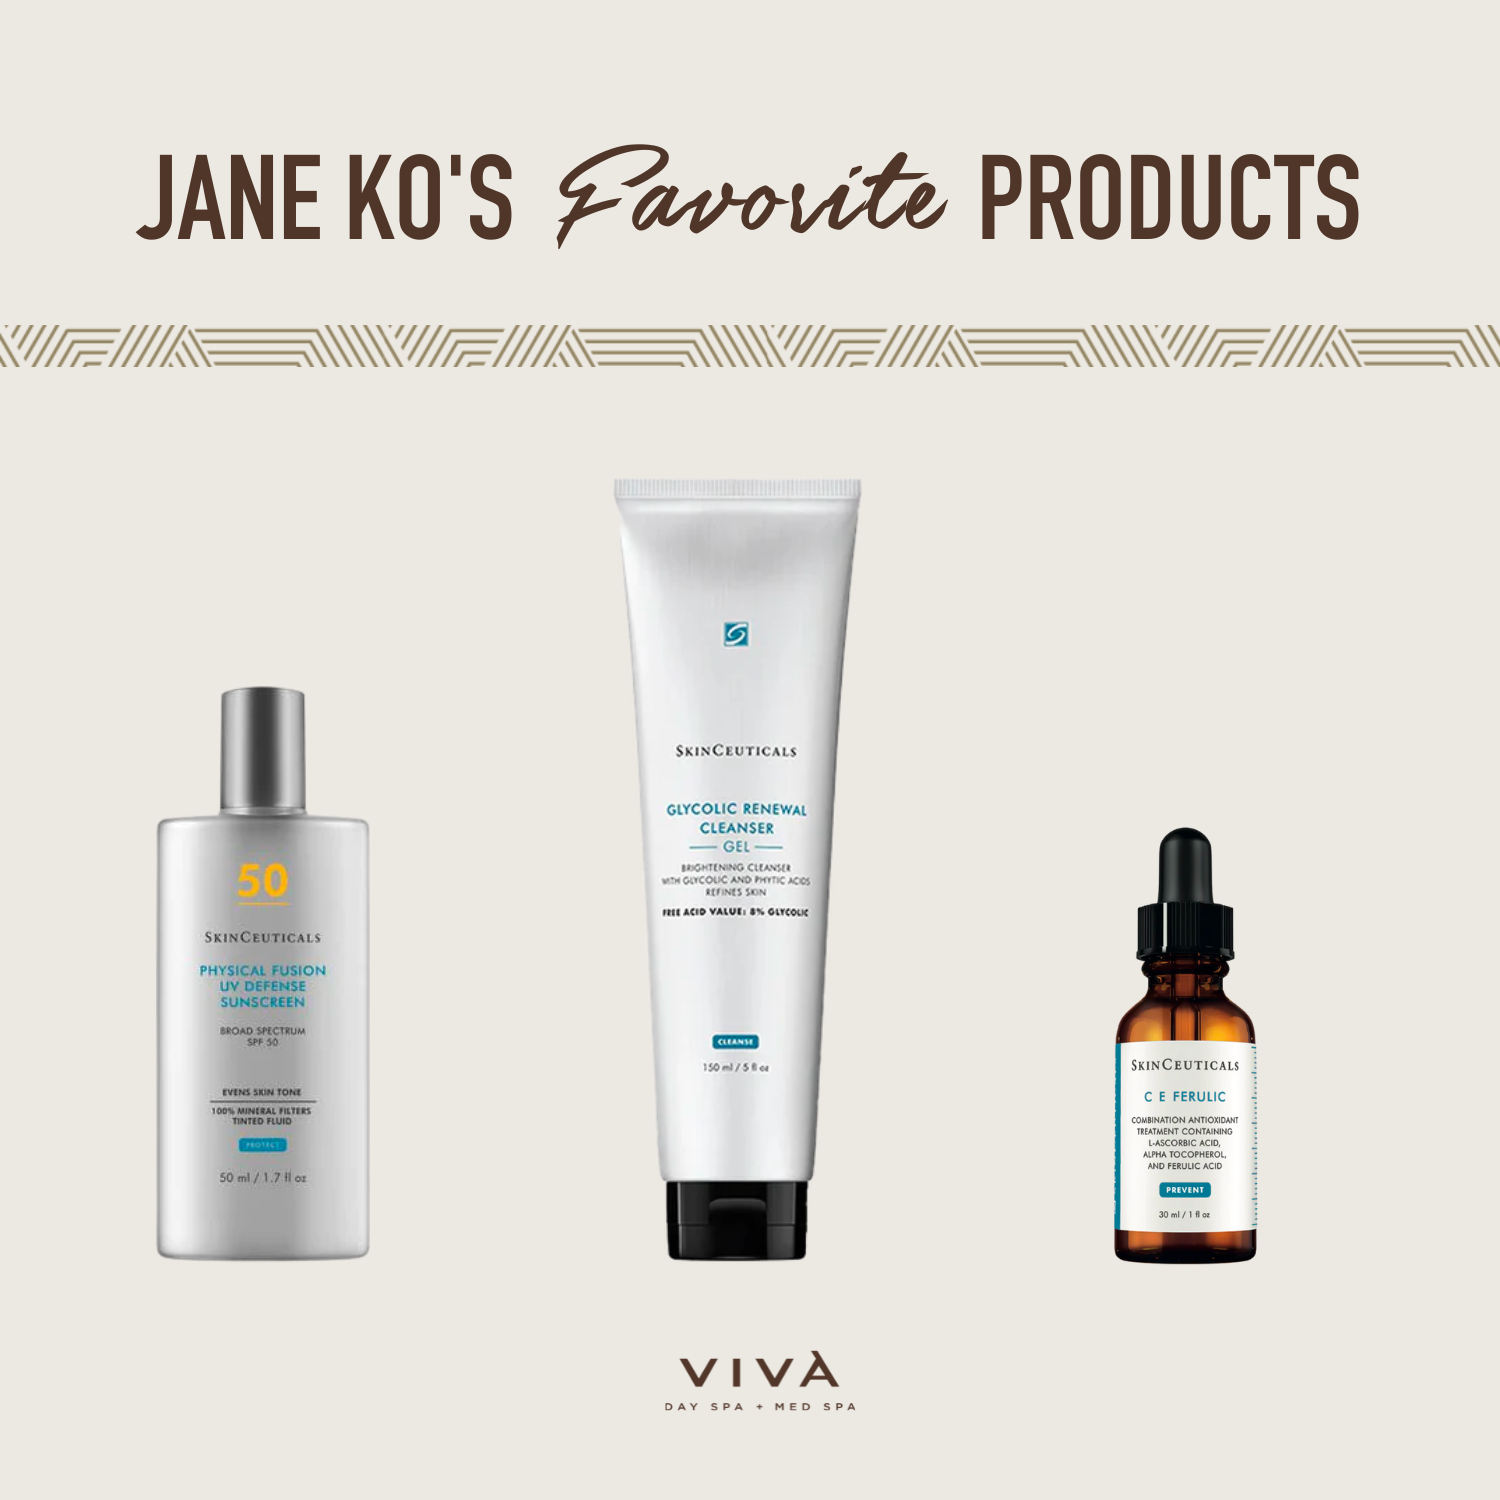 Jane Ko's Favorite Skincare Products from Viva Day Spa + Med Spa